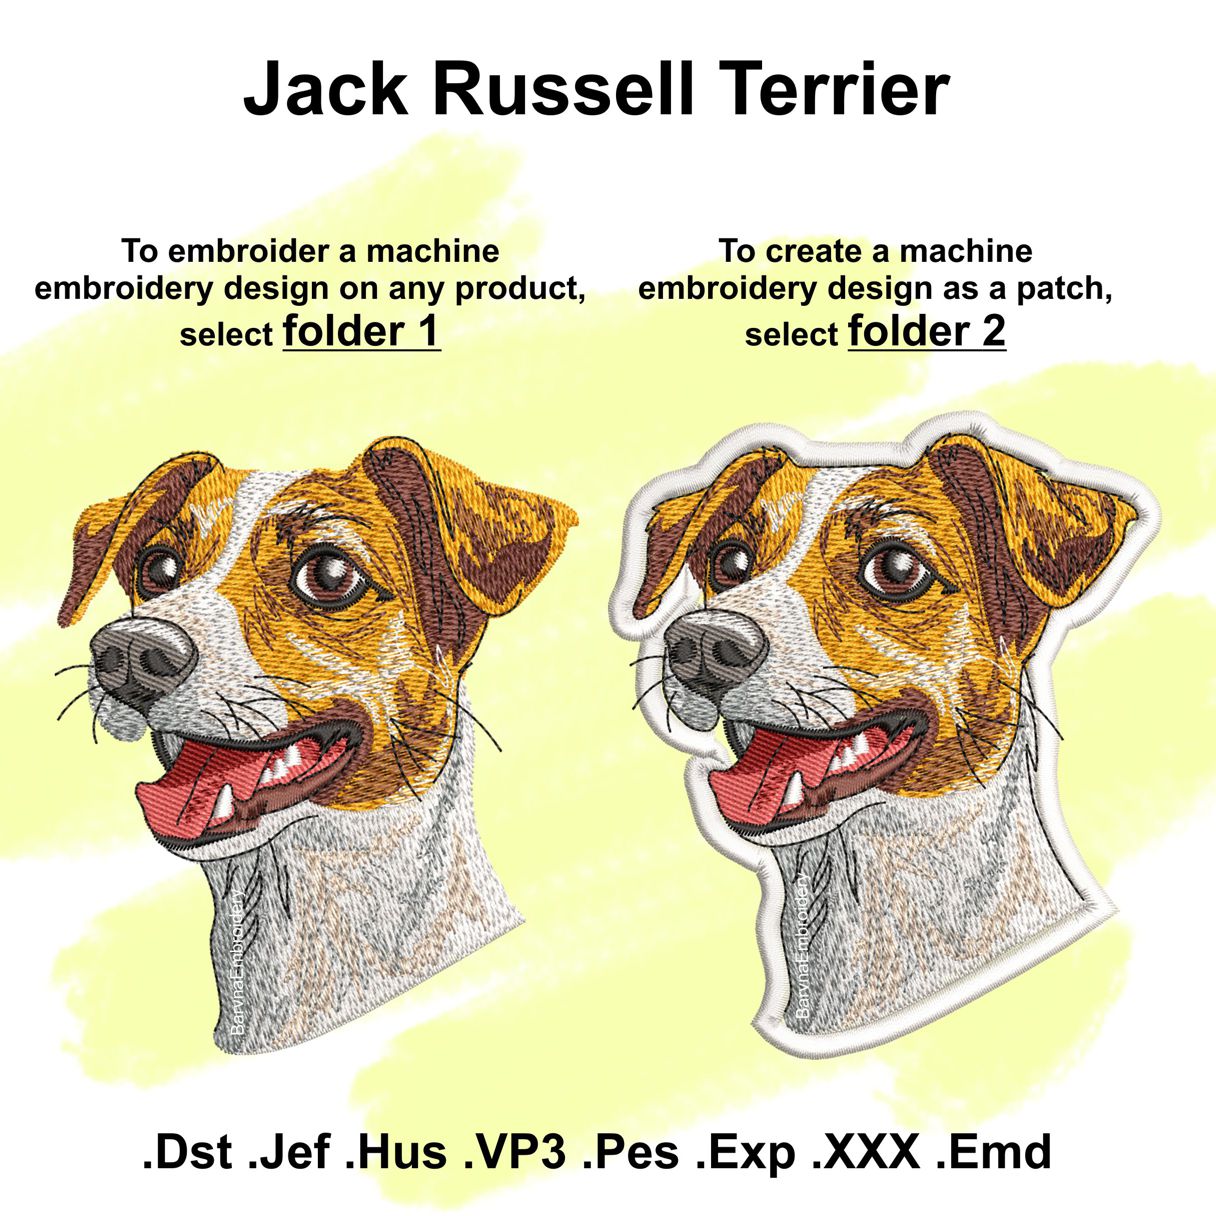 Jack Russell Terrier Patch Embroidery Design for machine.